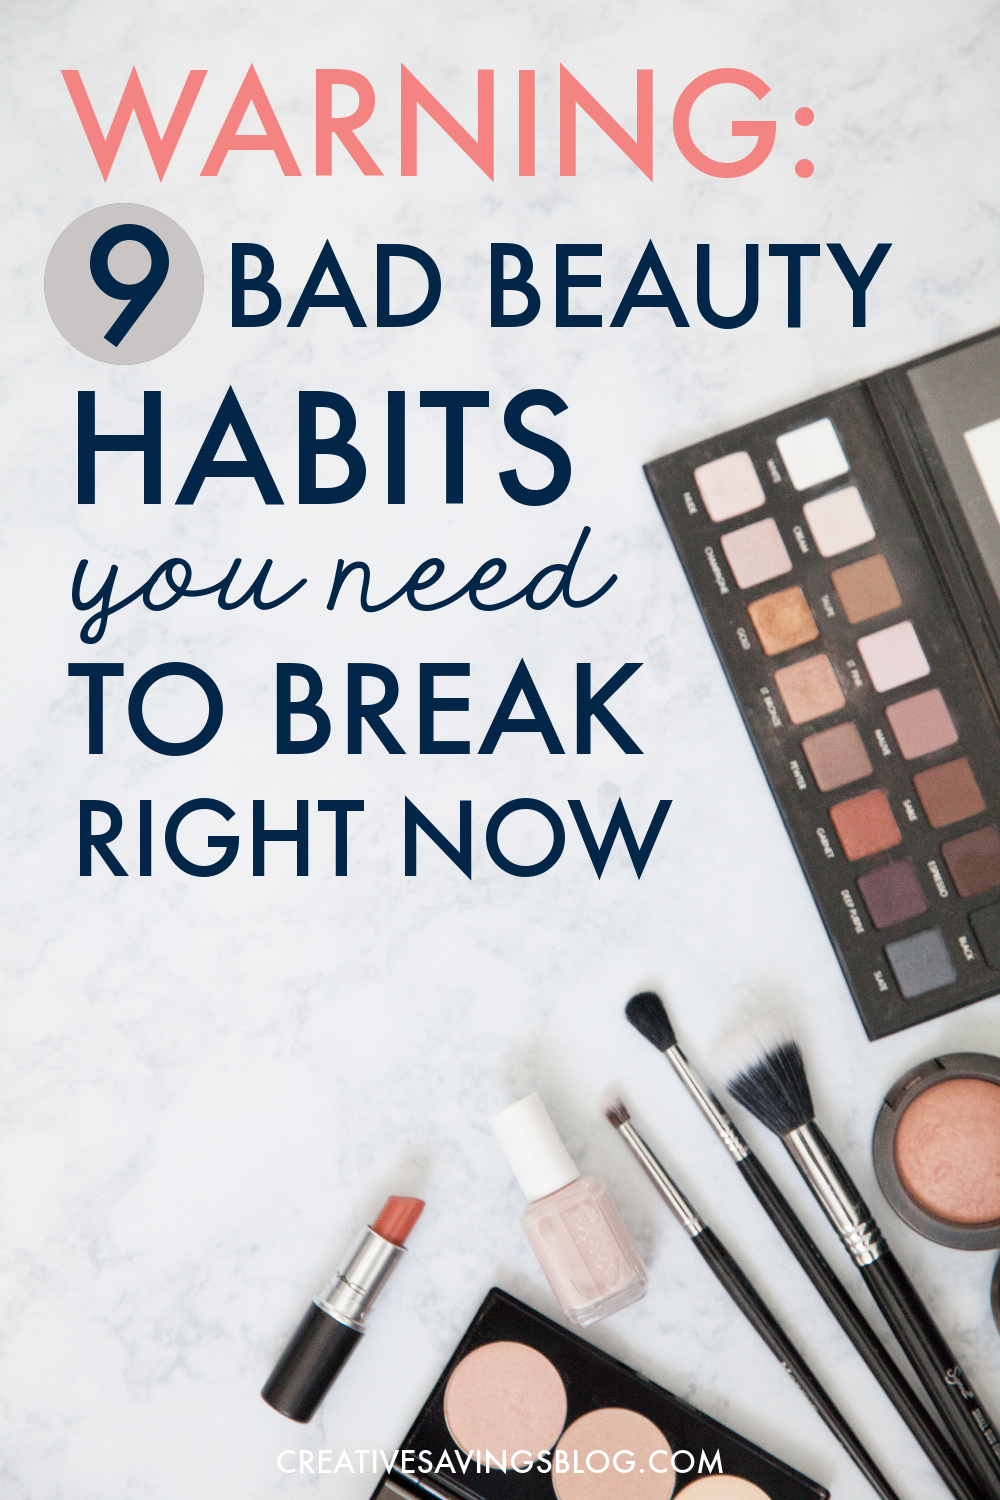 Are you unknowingly practicing one of these beauty no-no's? It's time to break bad habits for good with simple quick fixes you can easily commit to. In the long run, you'll not only fight signs of aging, you'll also look and feel a whole lot healthier! #badbeautyhabits #healthybeautyhabits #beautyhabits #mascaraexpires #noreally